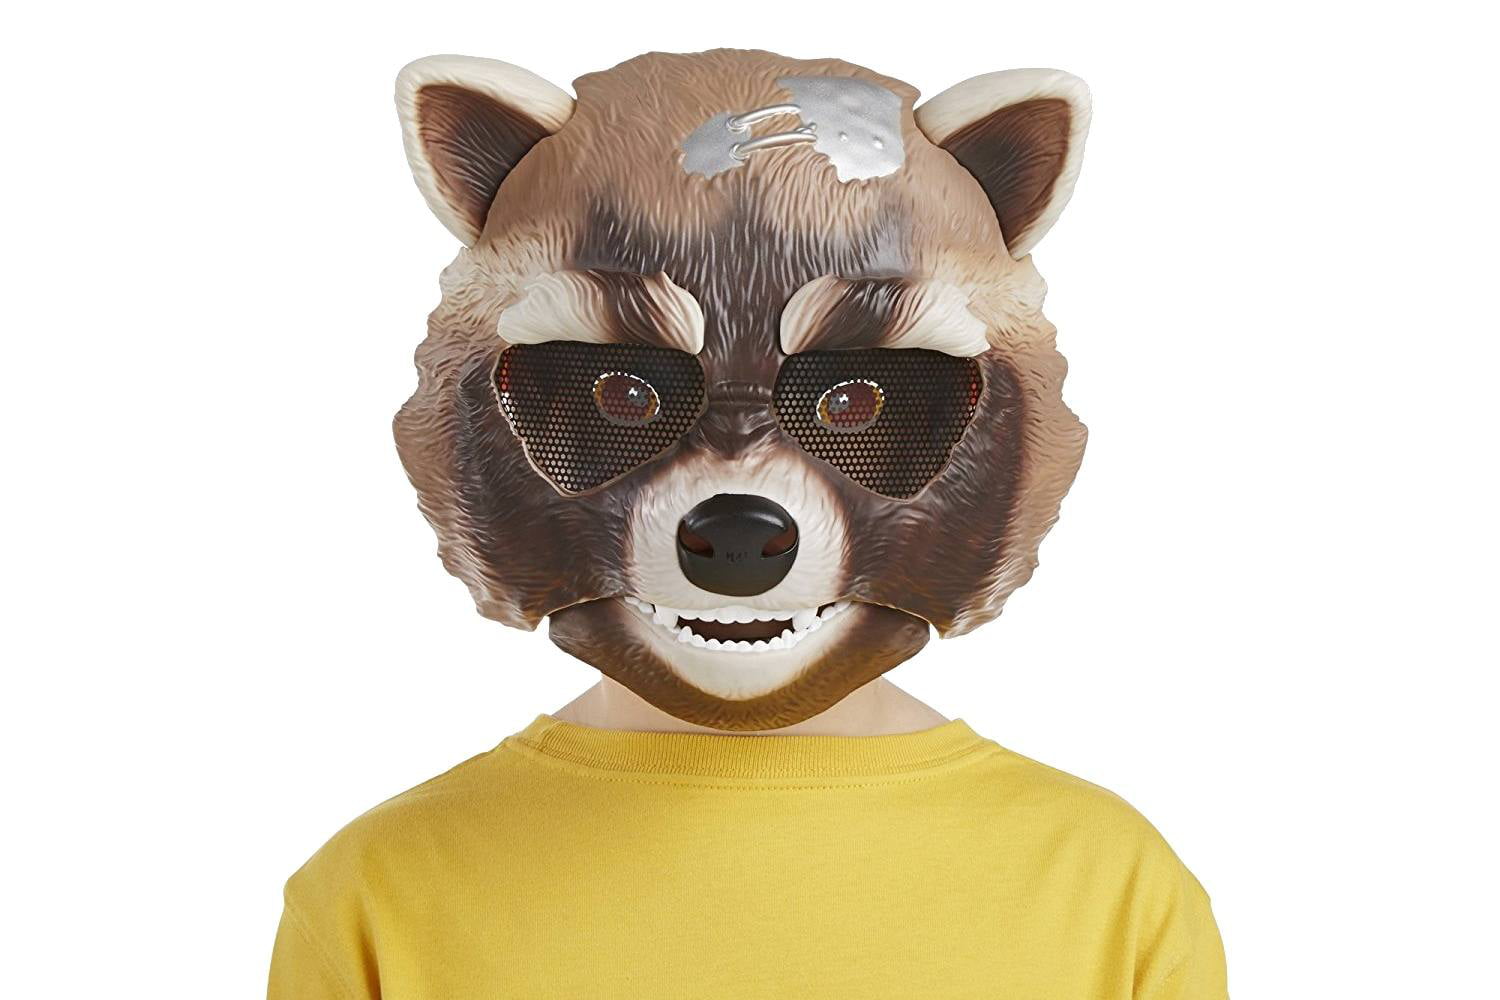 Guardians of the Galaxy Rocket Raccoon Mask Move Mouth Eyebrows & Ears Move New 